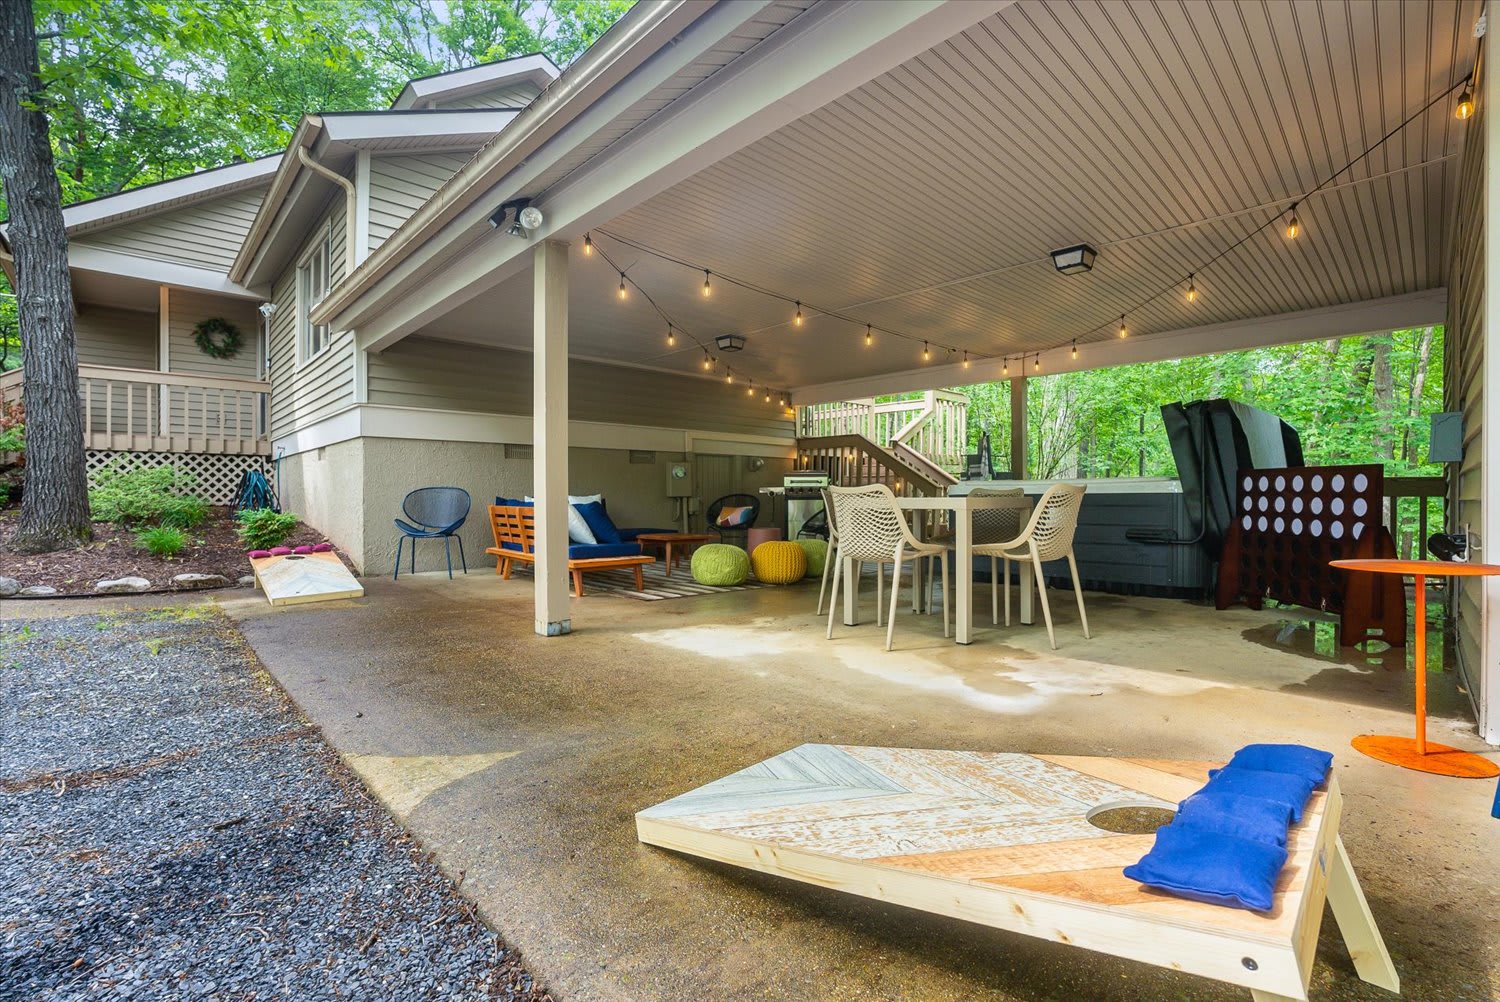 Our carport transforms into a versatile outdoor space with lounging areas, a hot tub, a BBQ grill, and a cornhole for endless fun!